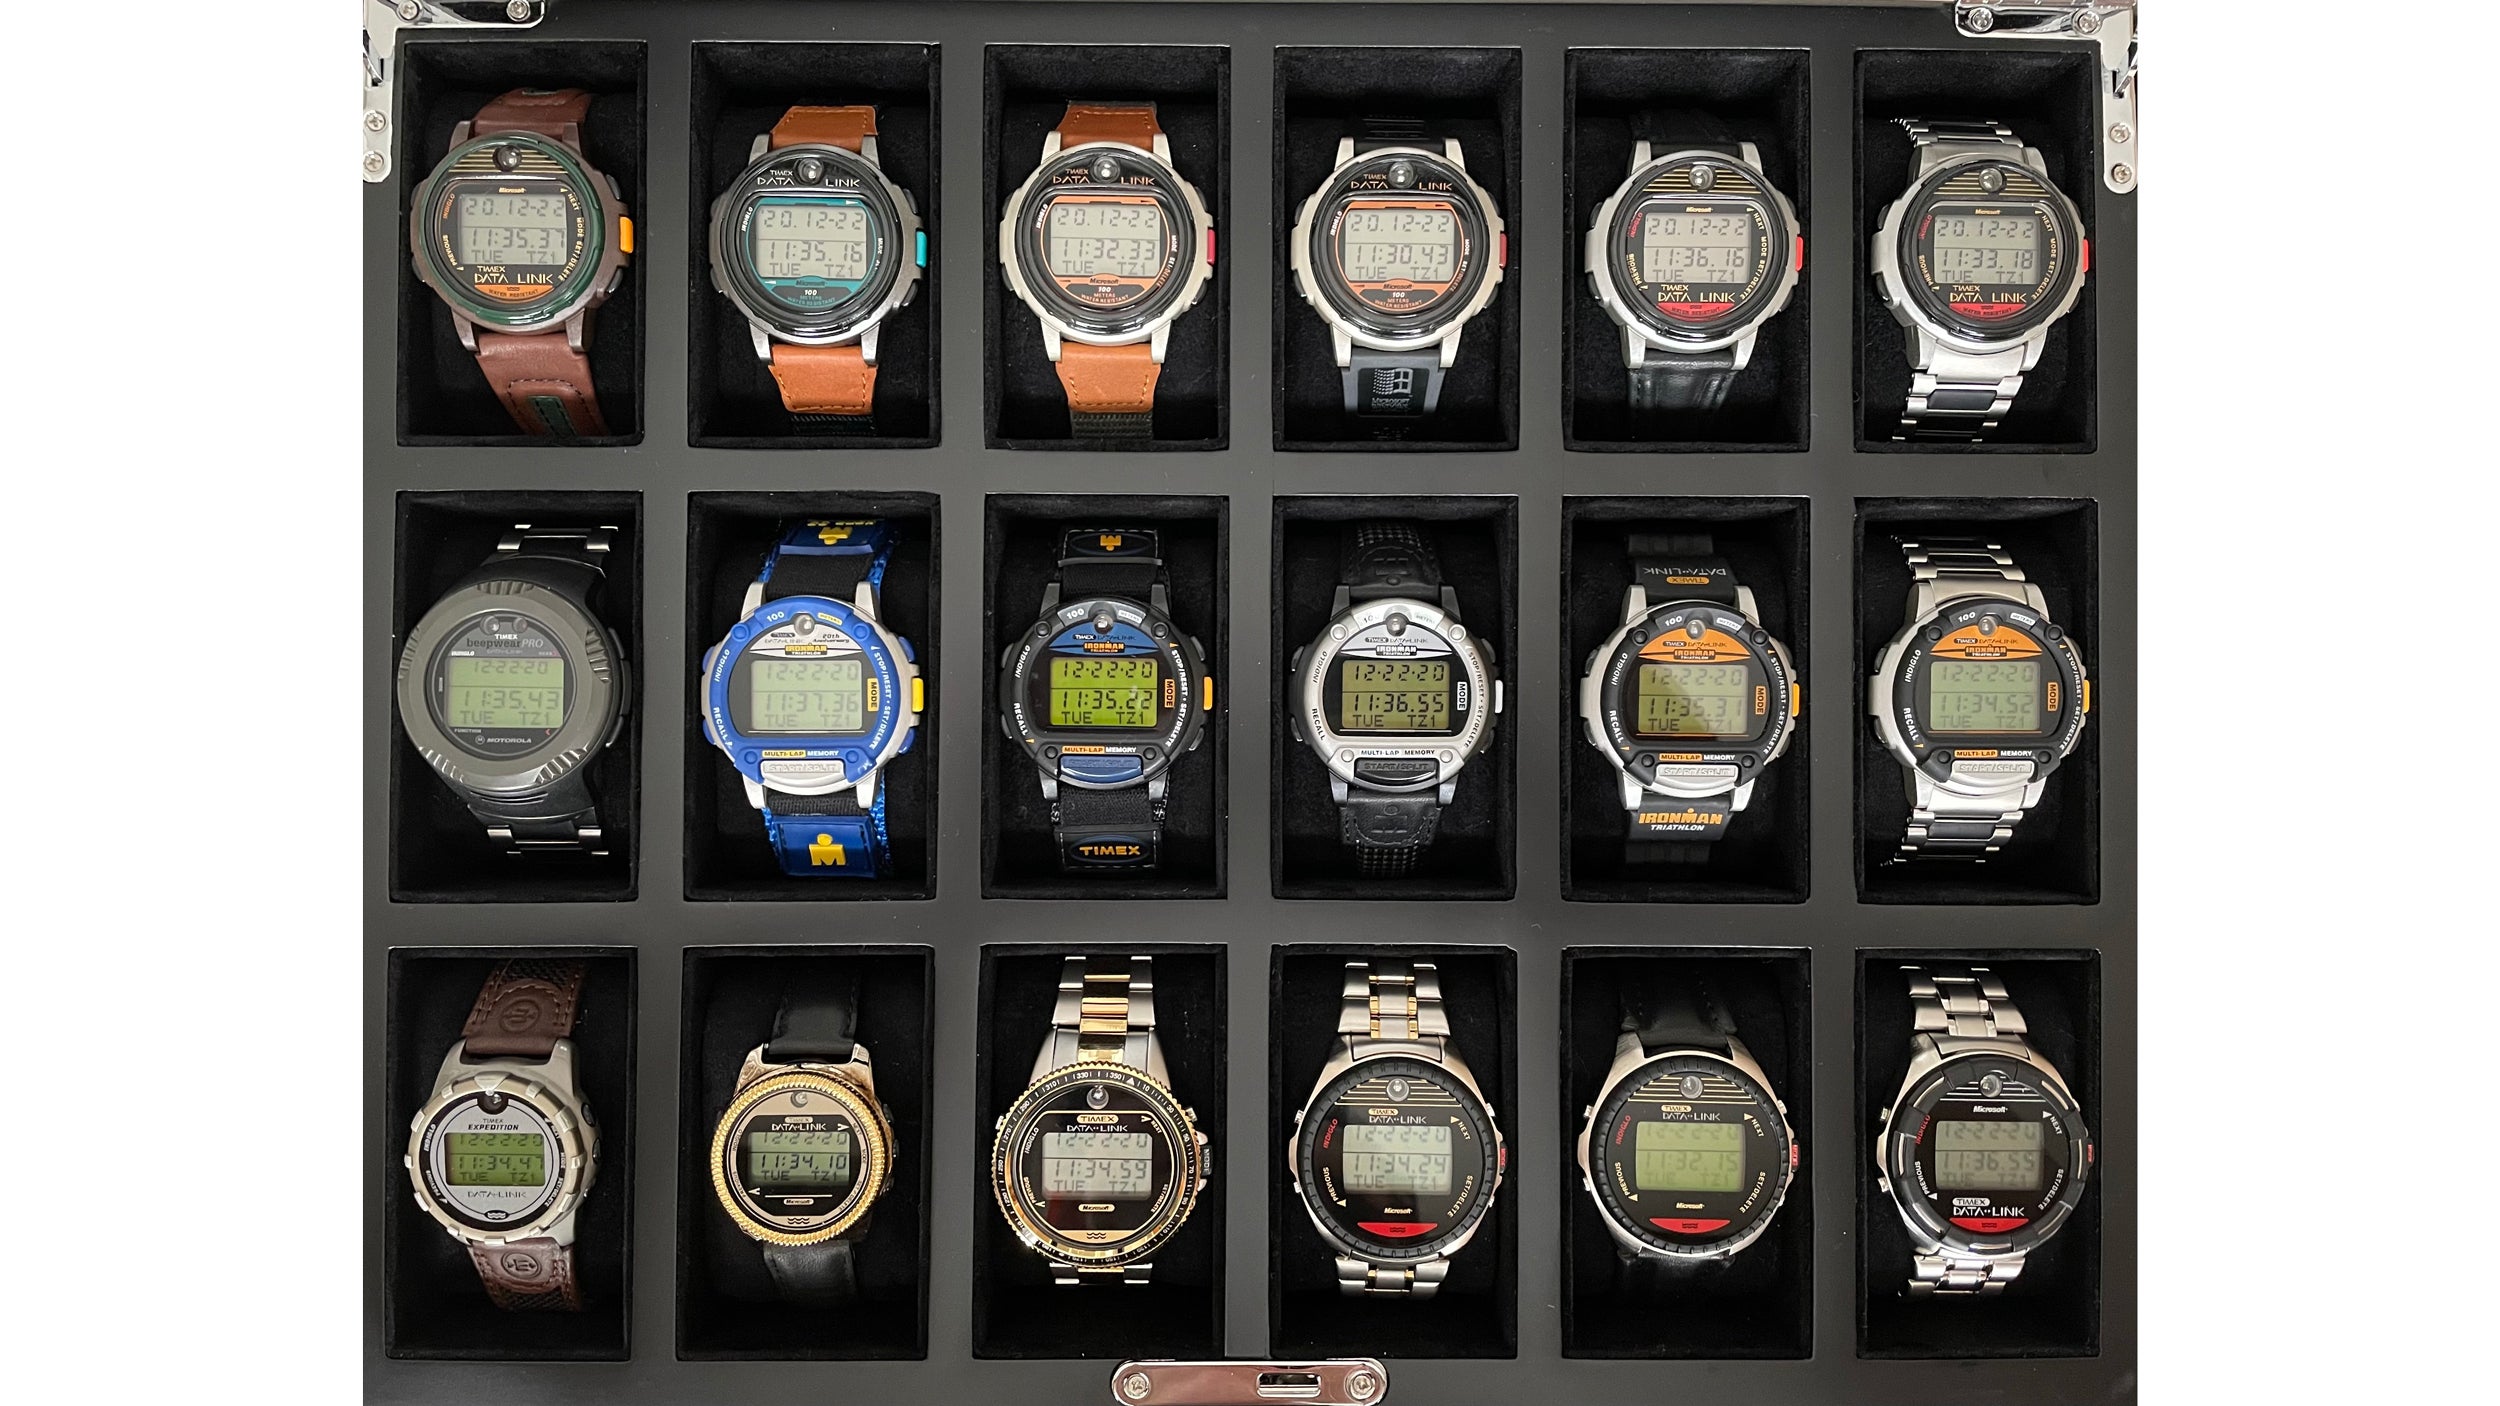 11 Early Smartwatch Attempts That Were Extremely Dumb